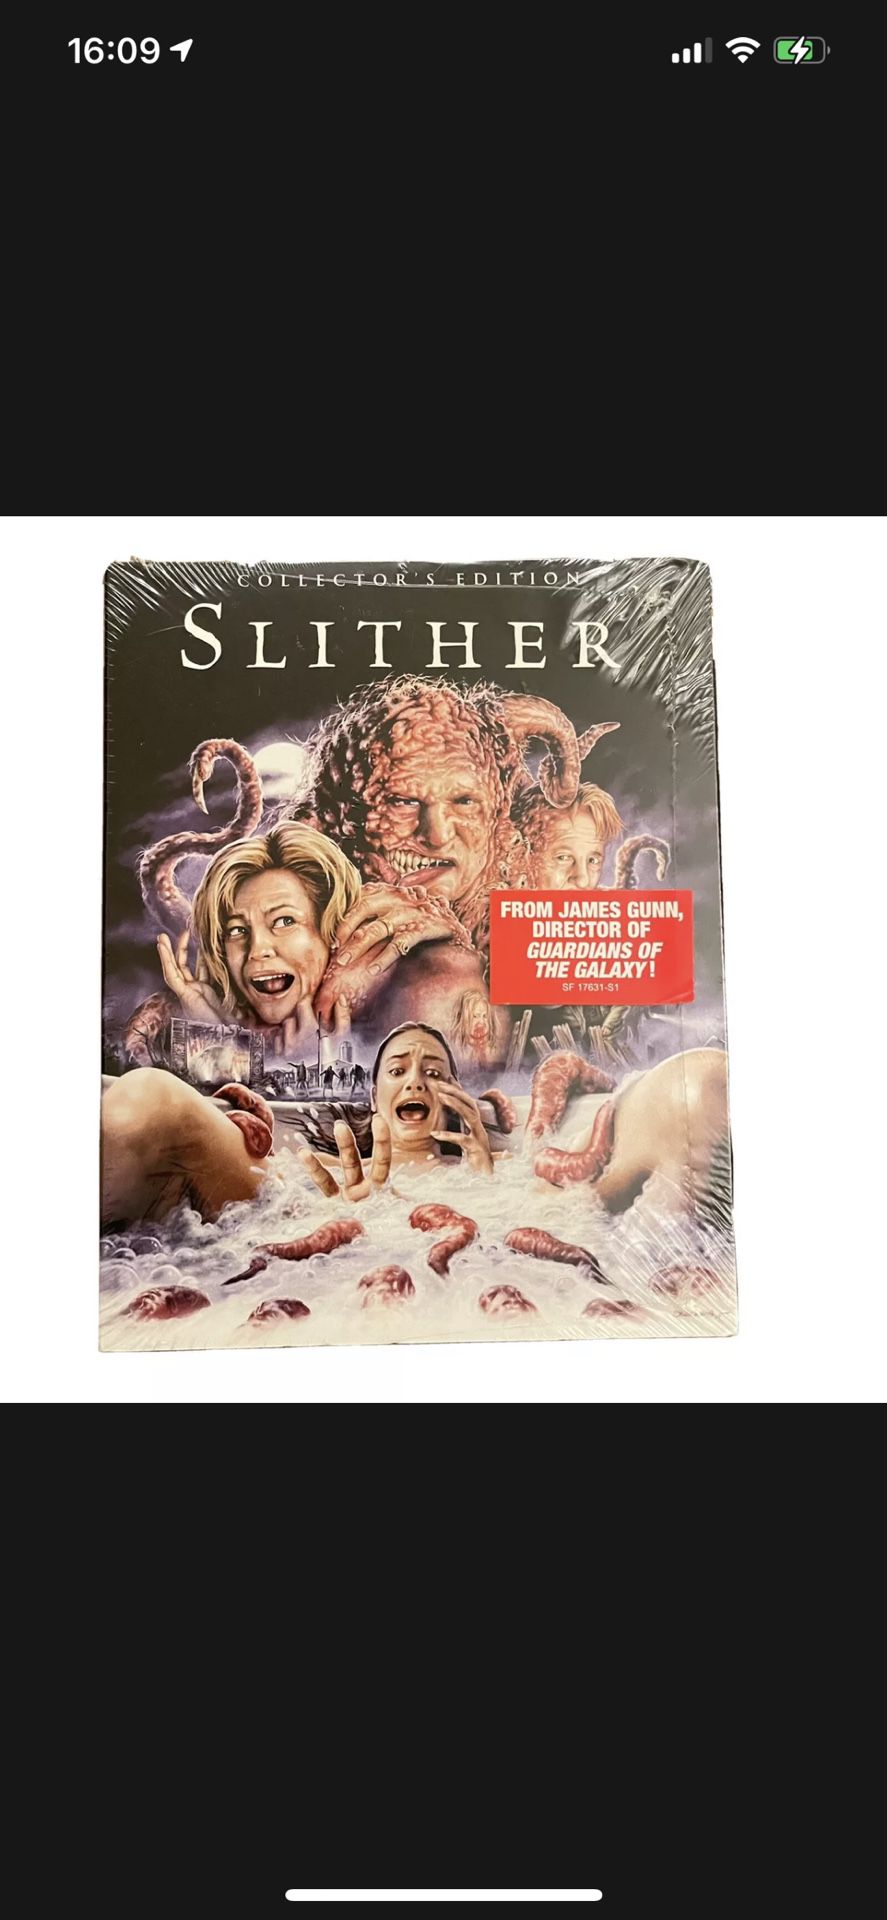 Slither - Collector's Edition [Blu-ray]